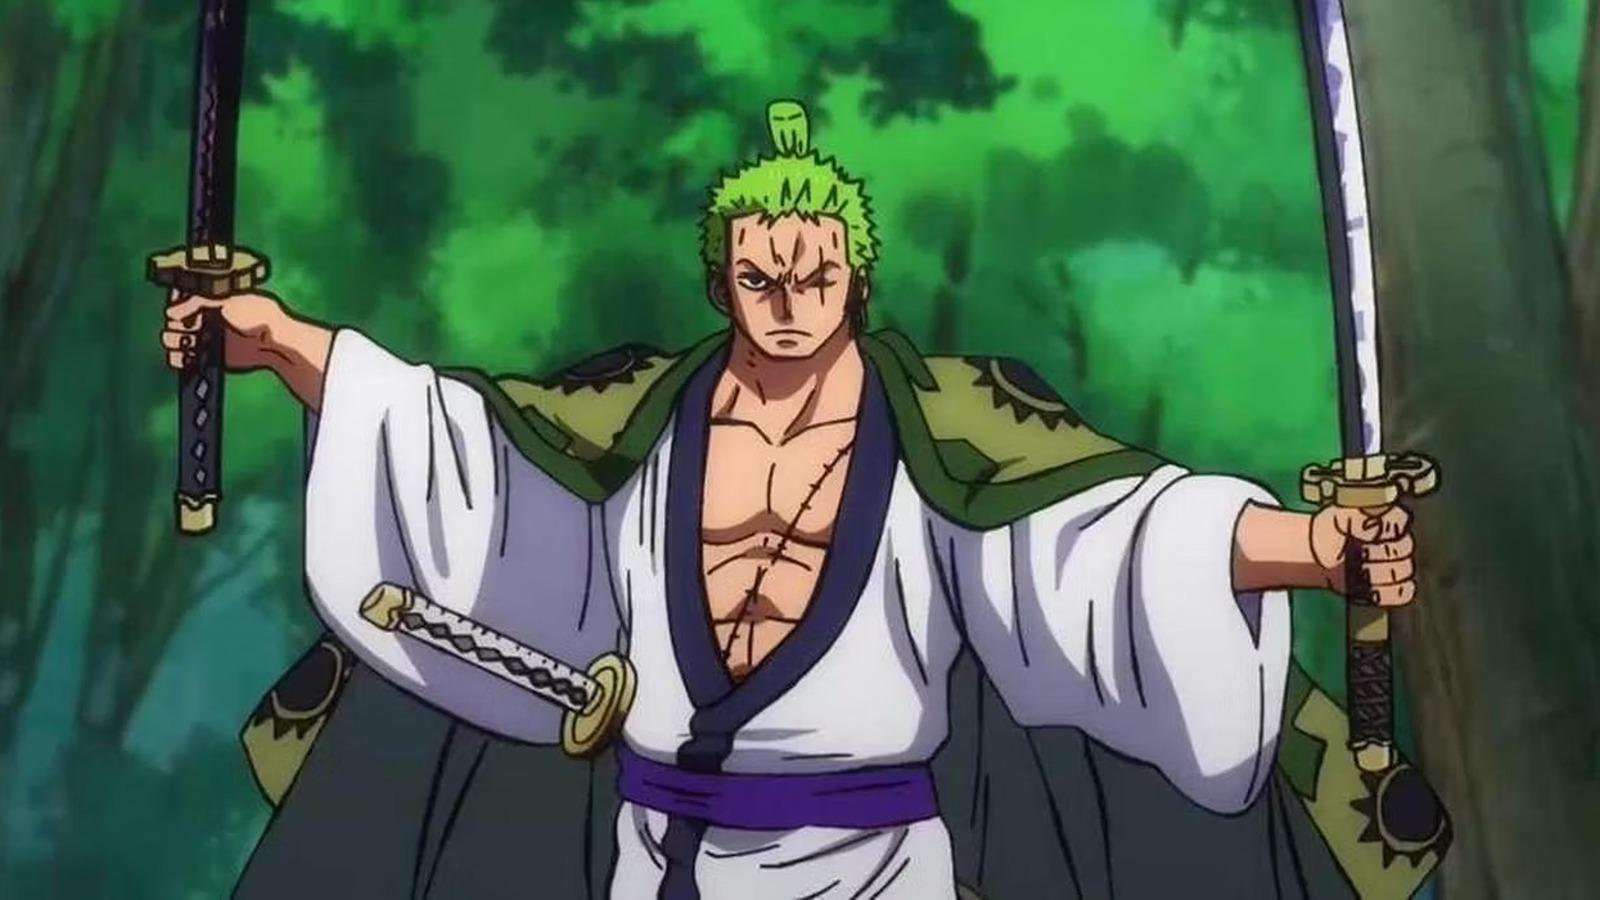 An image of Zoro getting ready to fight in Wano